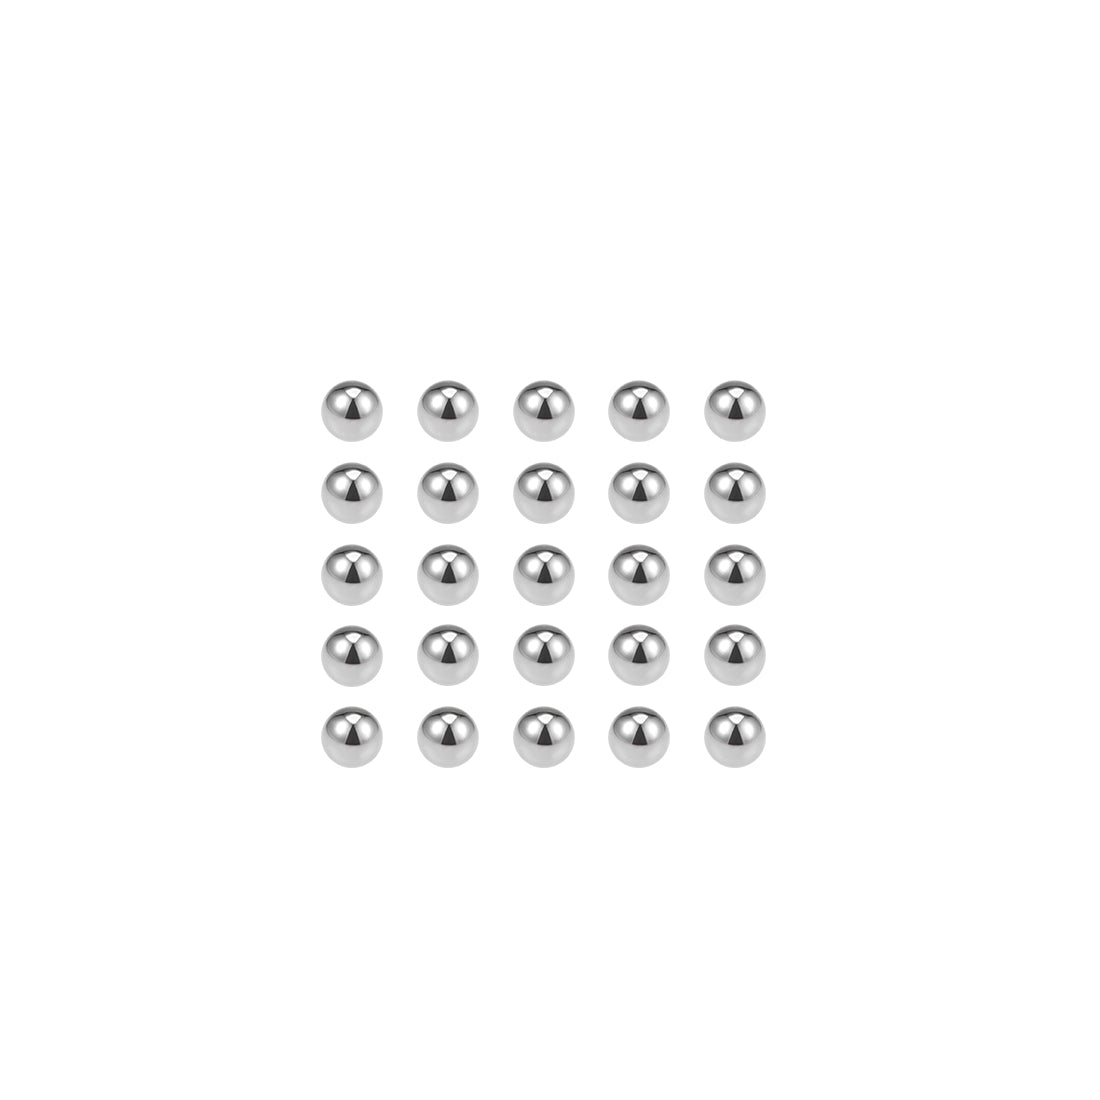 uxcell Uxcell Precision Balls 5/32" Solid Chrome Steel G25 for Ball Bearing Wheel 500pcs